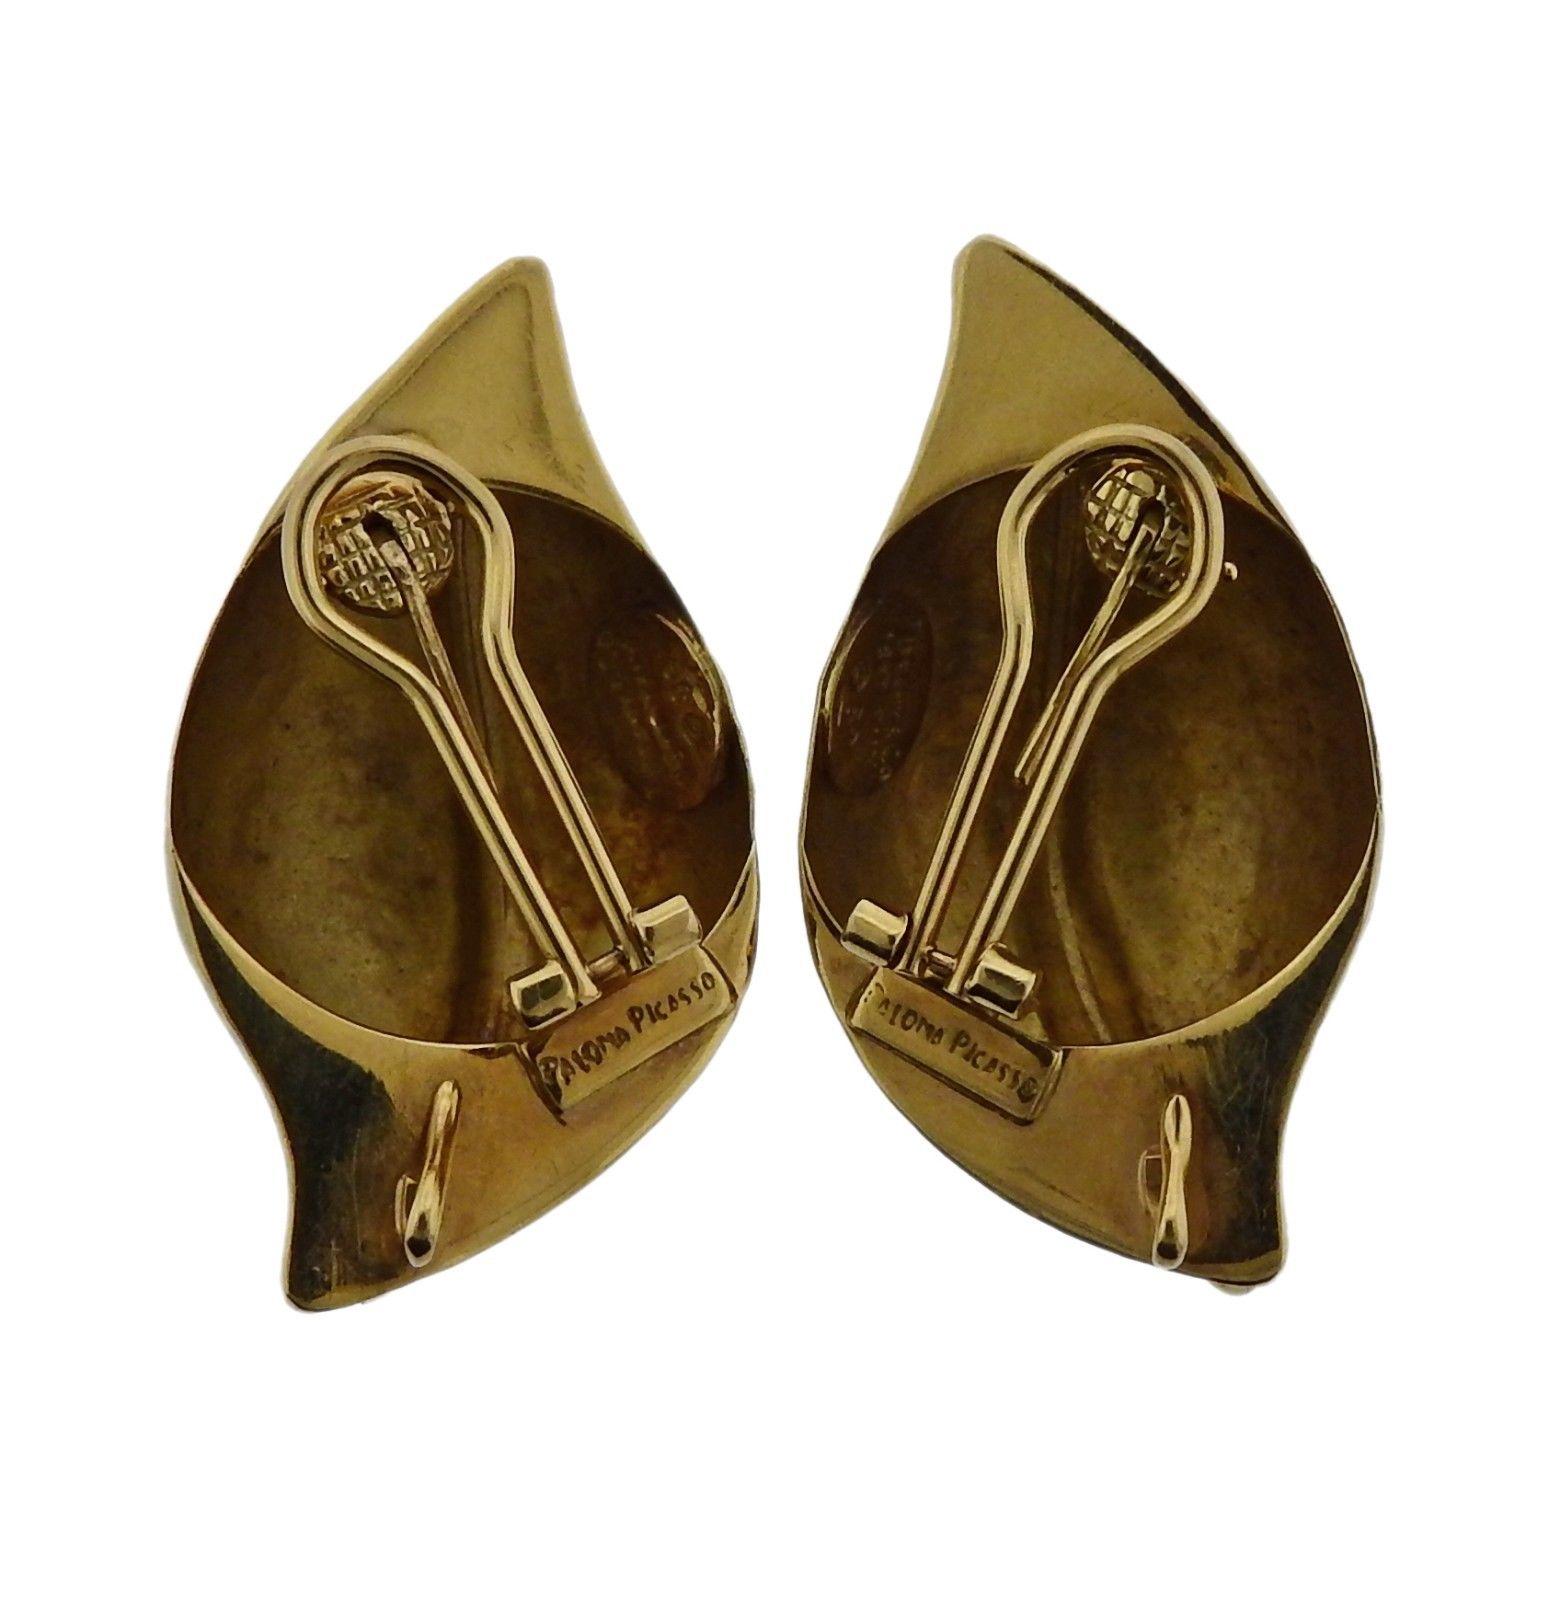 Tiffany & Co. Paloma Picasso Diamond Gold Earrings In Excellent Condition For Sale In Lambertville, NJ